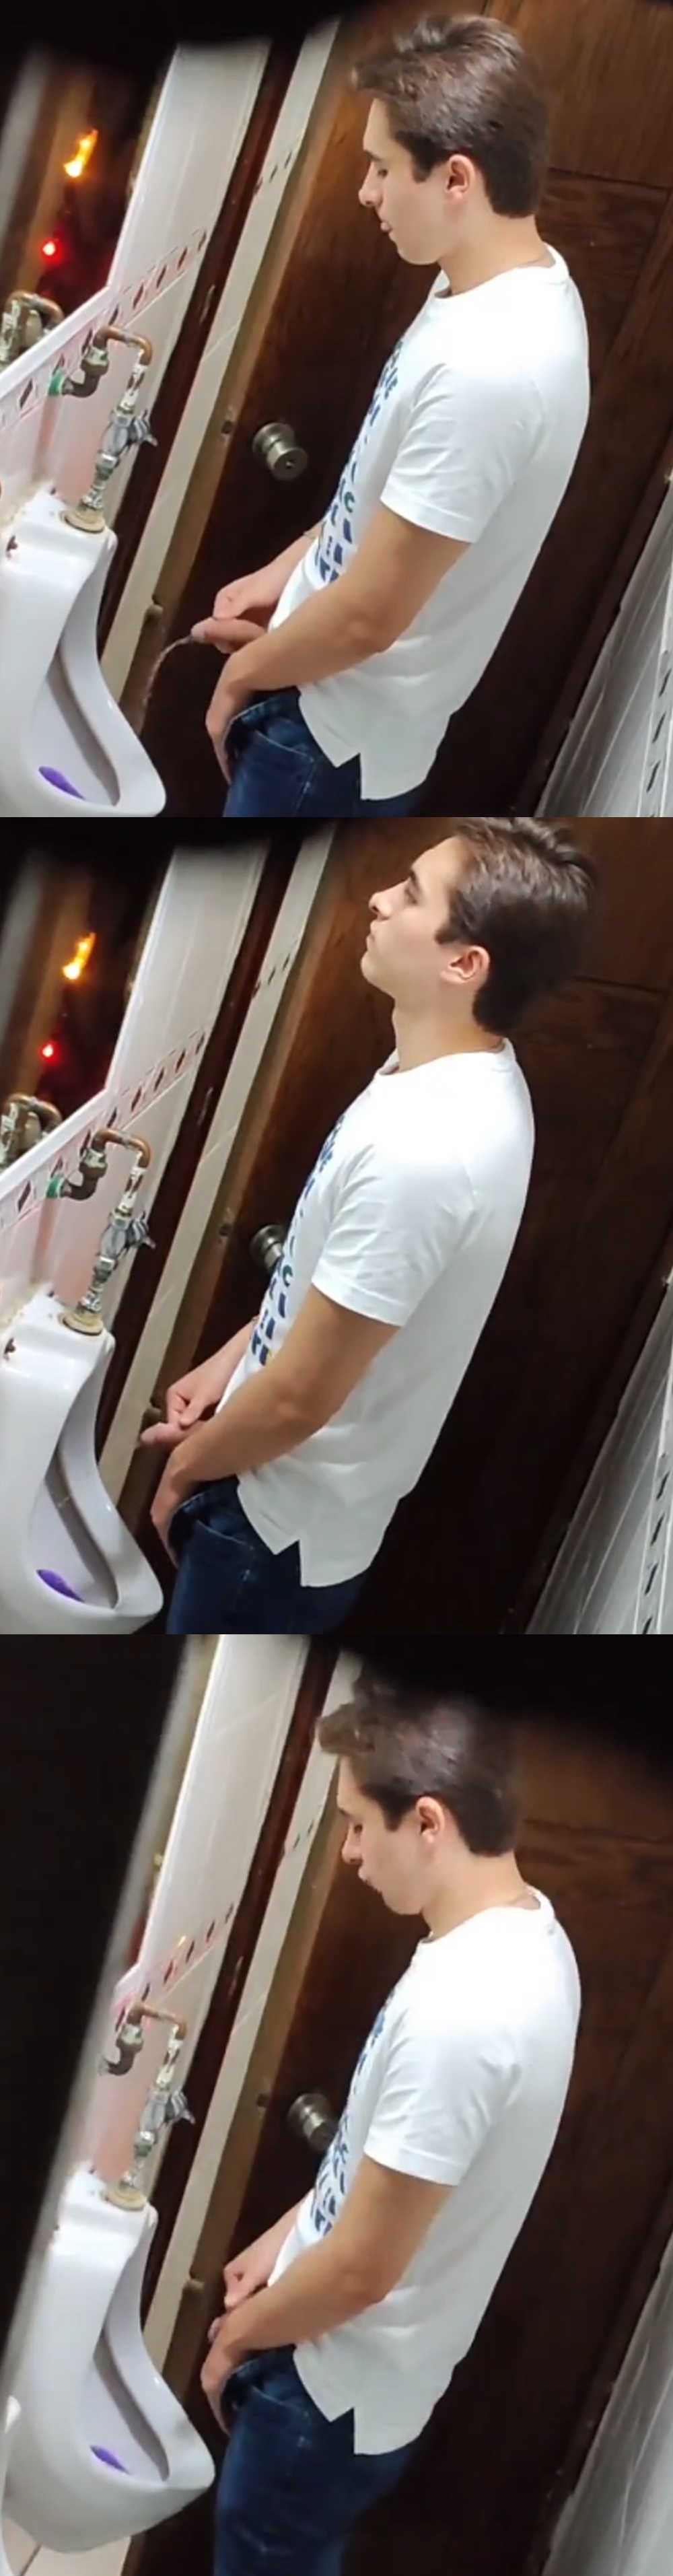 hung guy caught peeing by hidden cam in club public toilet